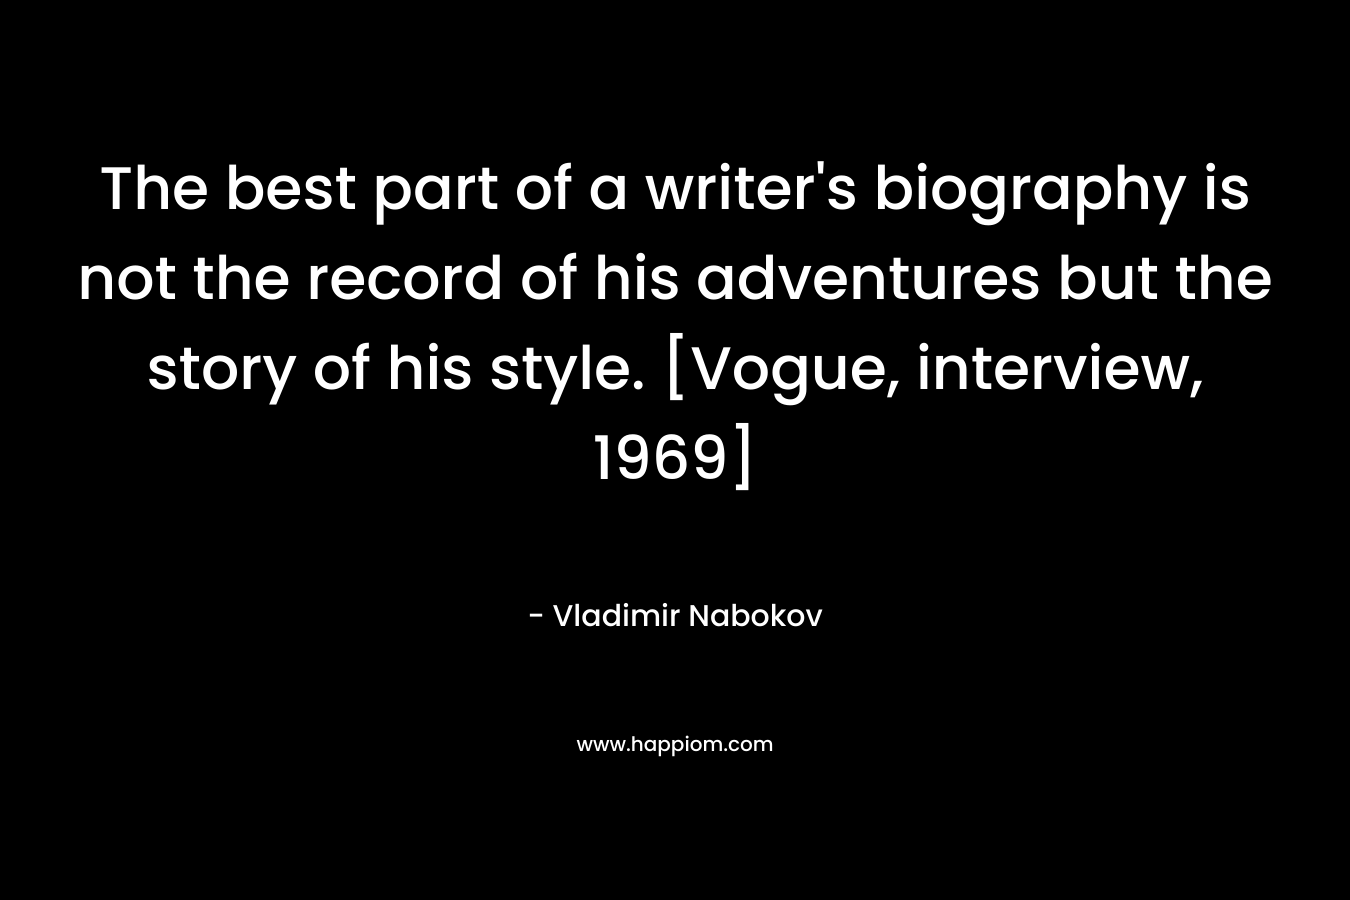 The best part of a writer’s biography is not the record of his adventures but the story of his style. [Vogue, interview, 1969] – Vladimir Nabokov